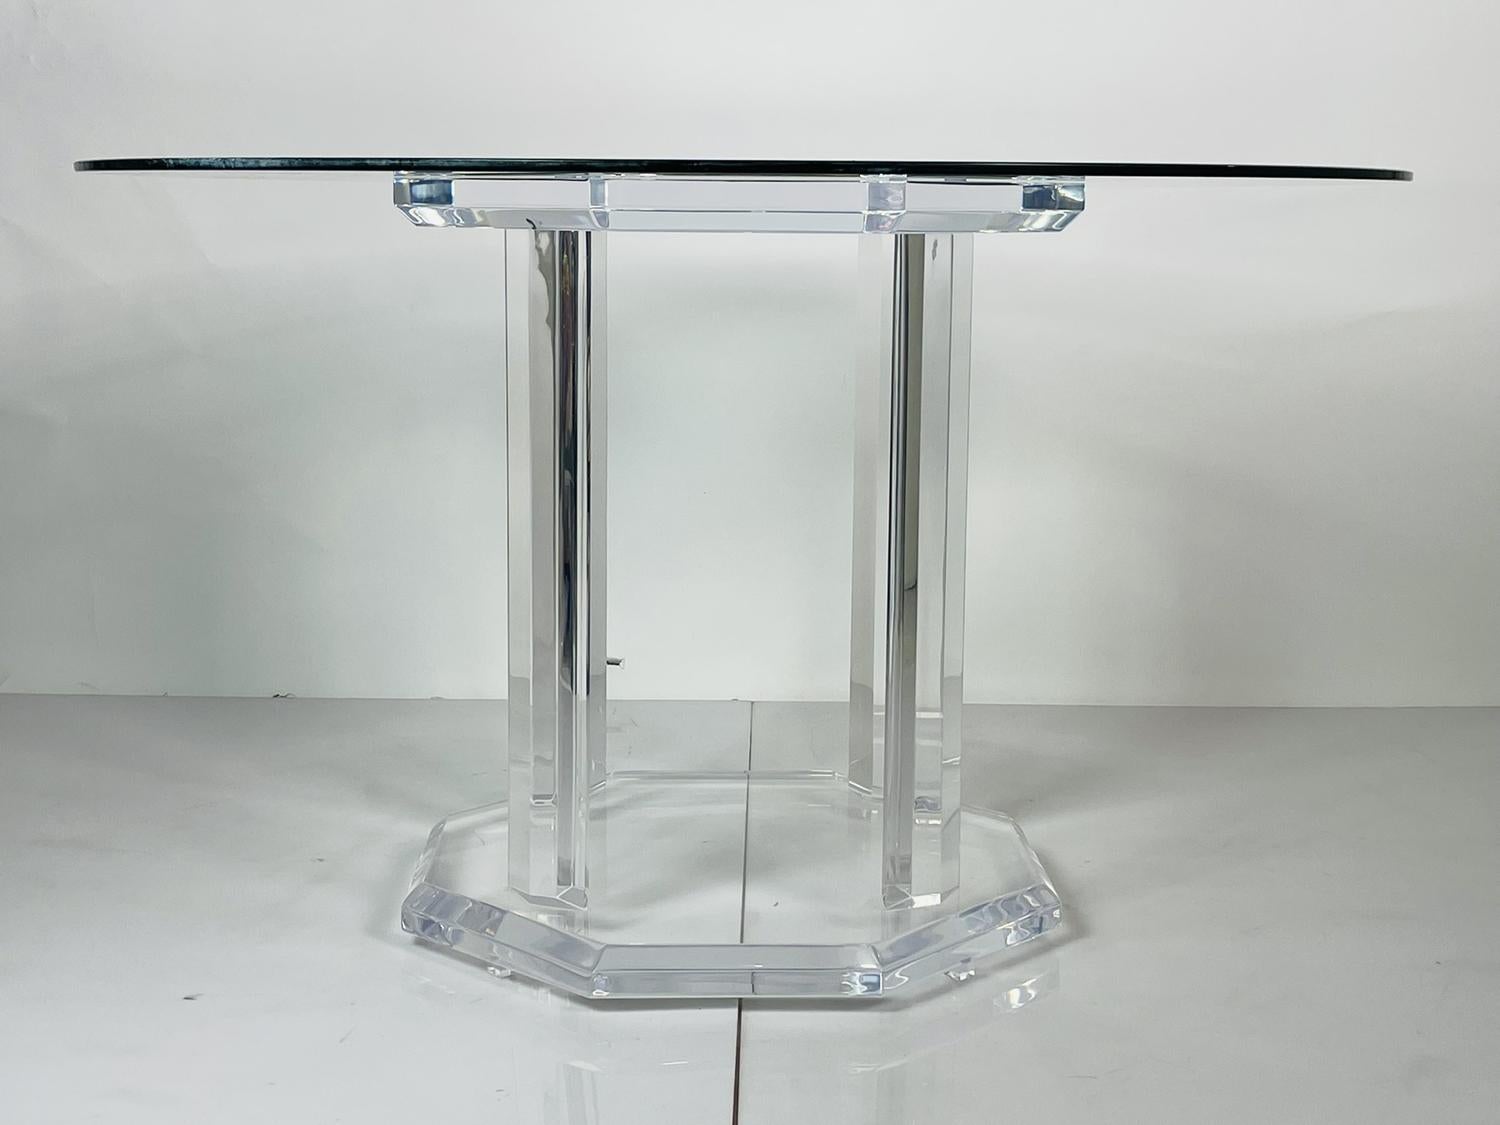 Beautiful lucite pedestal base for a large dining table having an octagonal shape made of 1.75 inches beveled lucite.

Measurements:
24.50 inches wide x 24.50 inches deep x 28.50 high, the glass shown is 48 inches in diameter but is not included